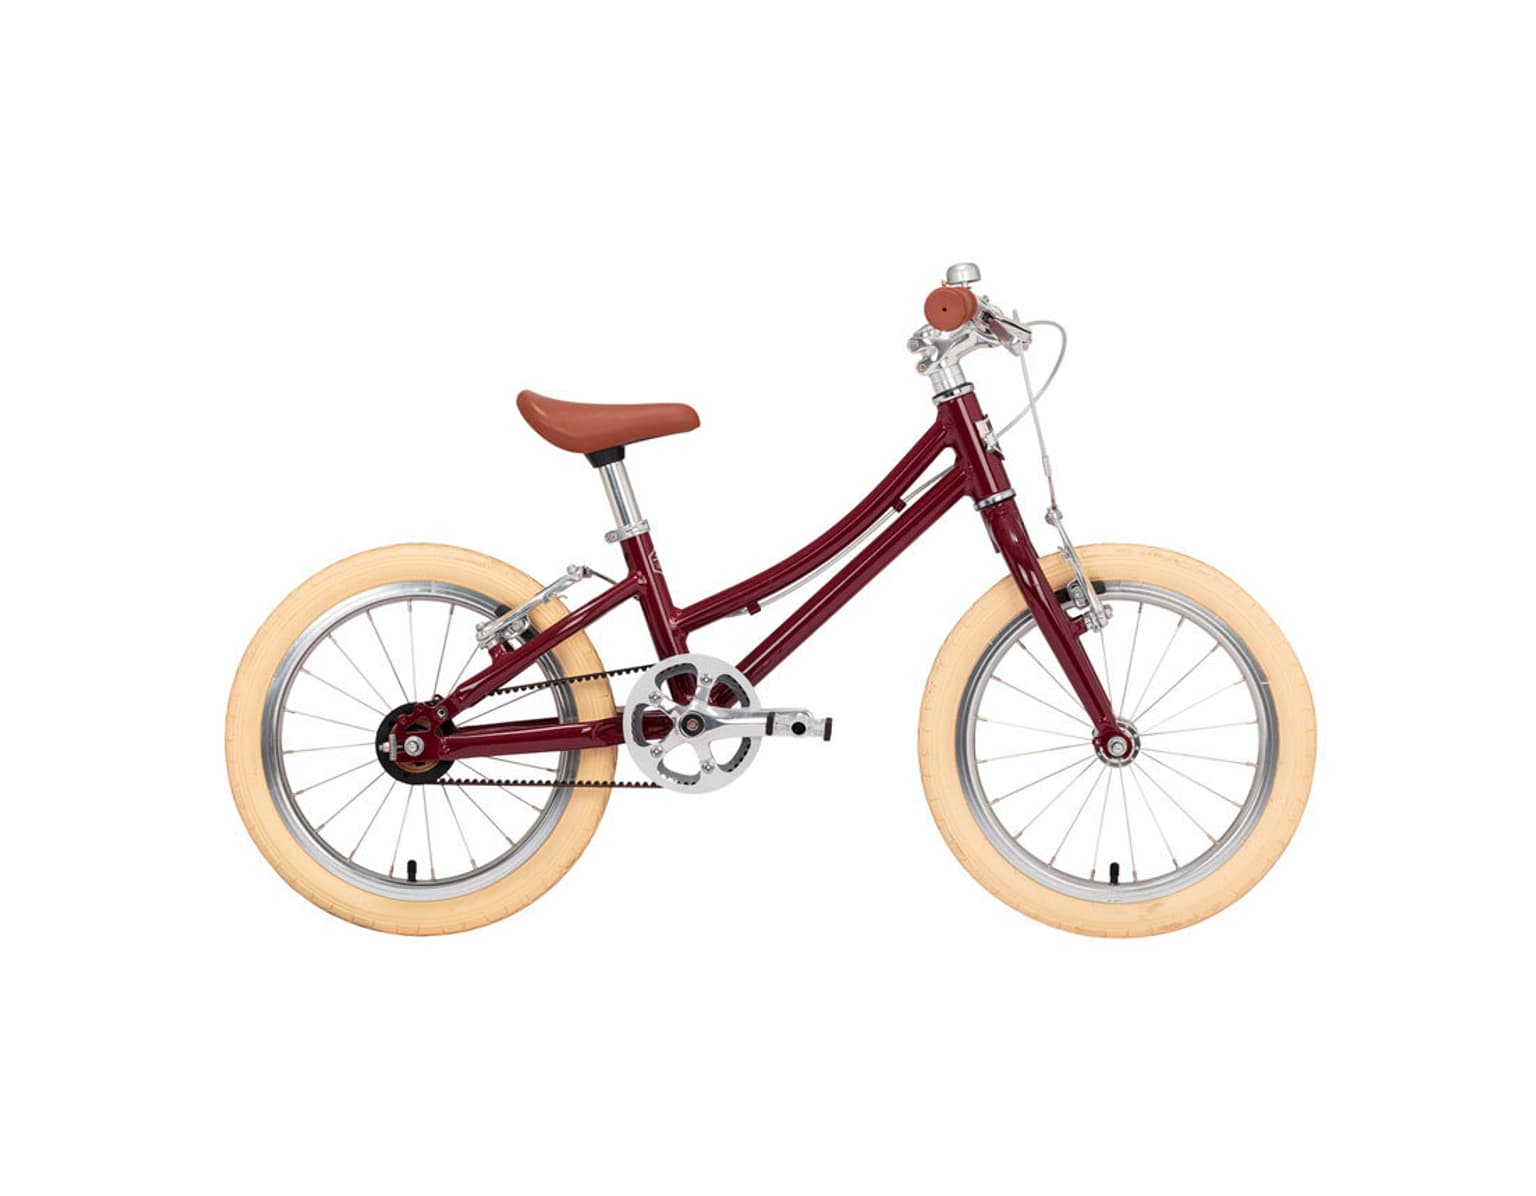 Siech Cycles Siech Cycles Kids Bike 16 Kindervelo rosso-scuro 1